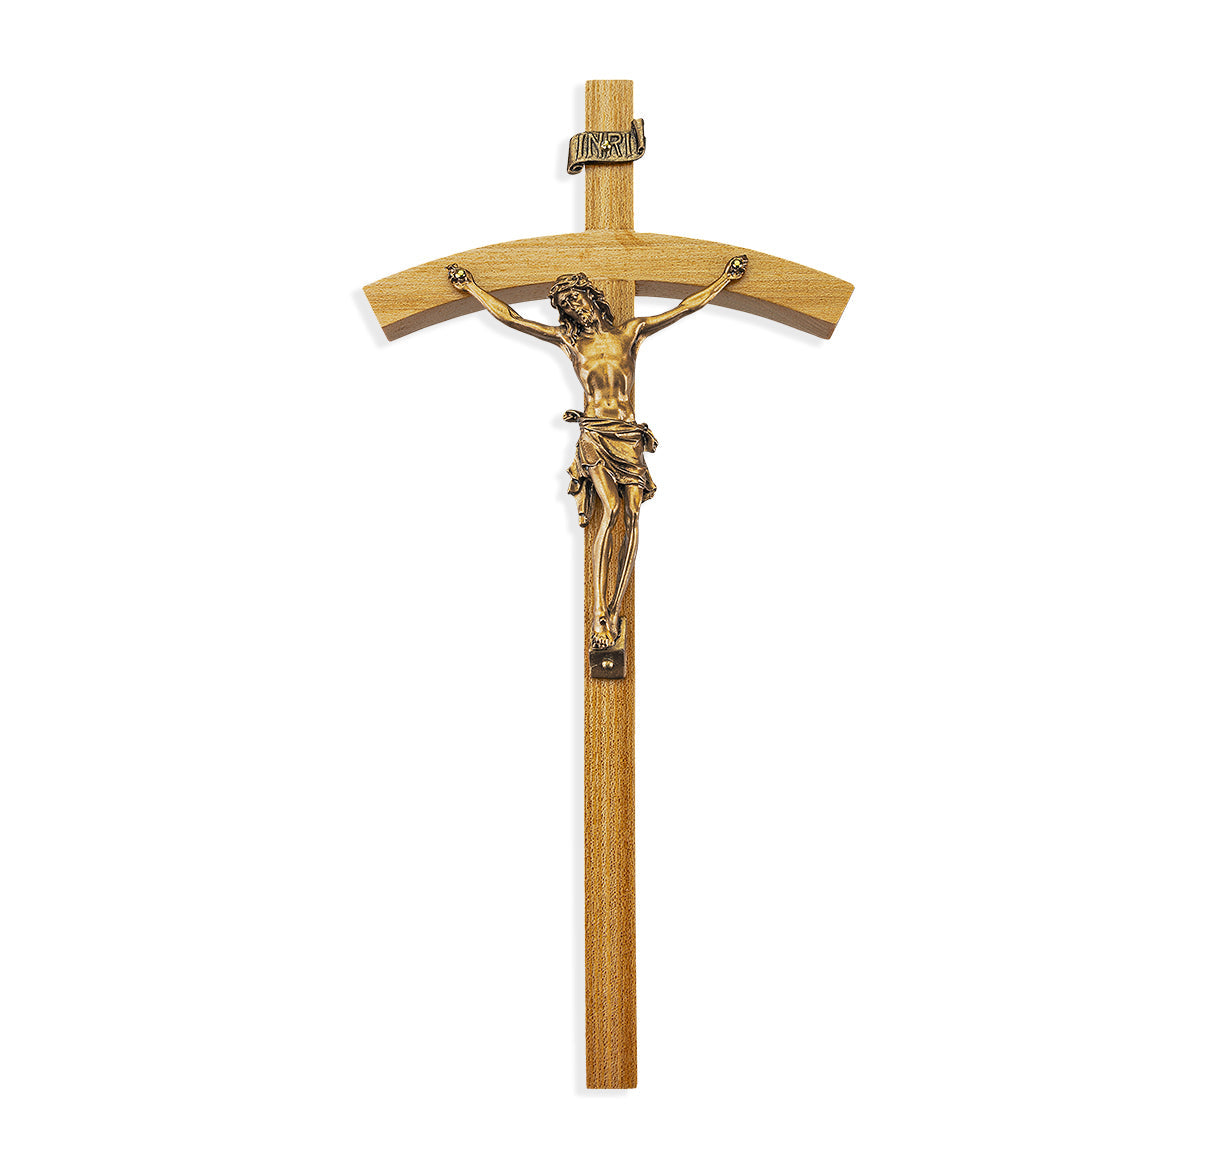 Large Catholic Oak Wood Wall Crucifix, 10", for Home, Office, Over Door